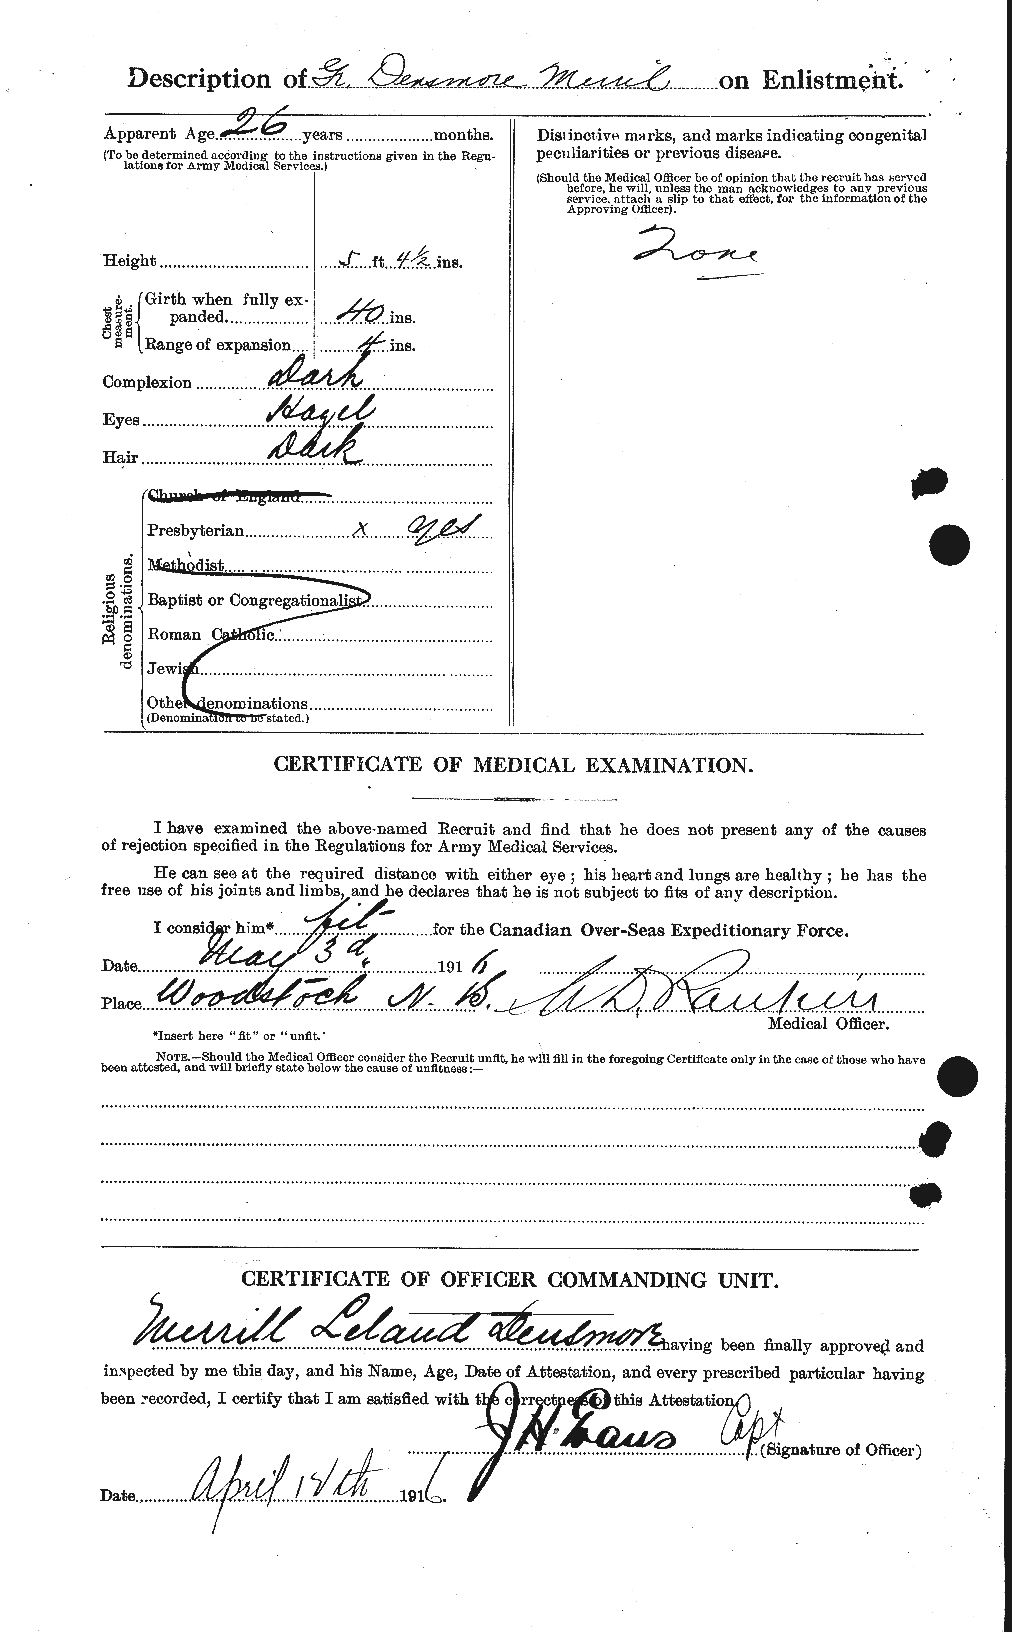 Personnel Records of the First World War - CEF 286436b